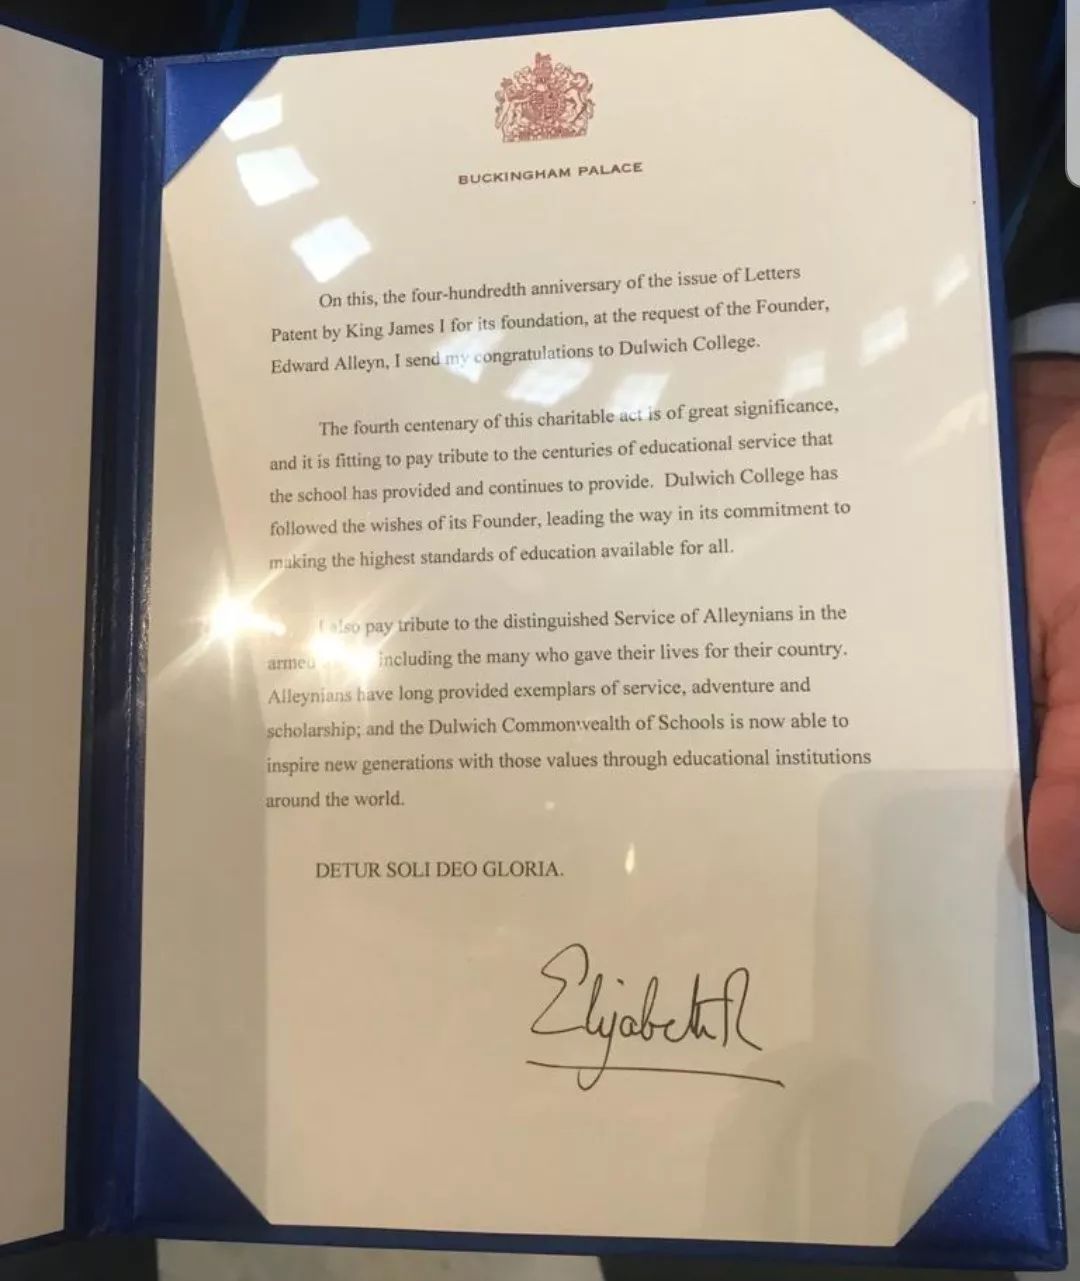 The queen sends a letter to congratulate Dulwich